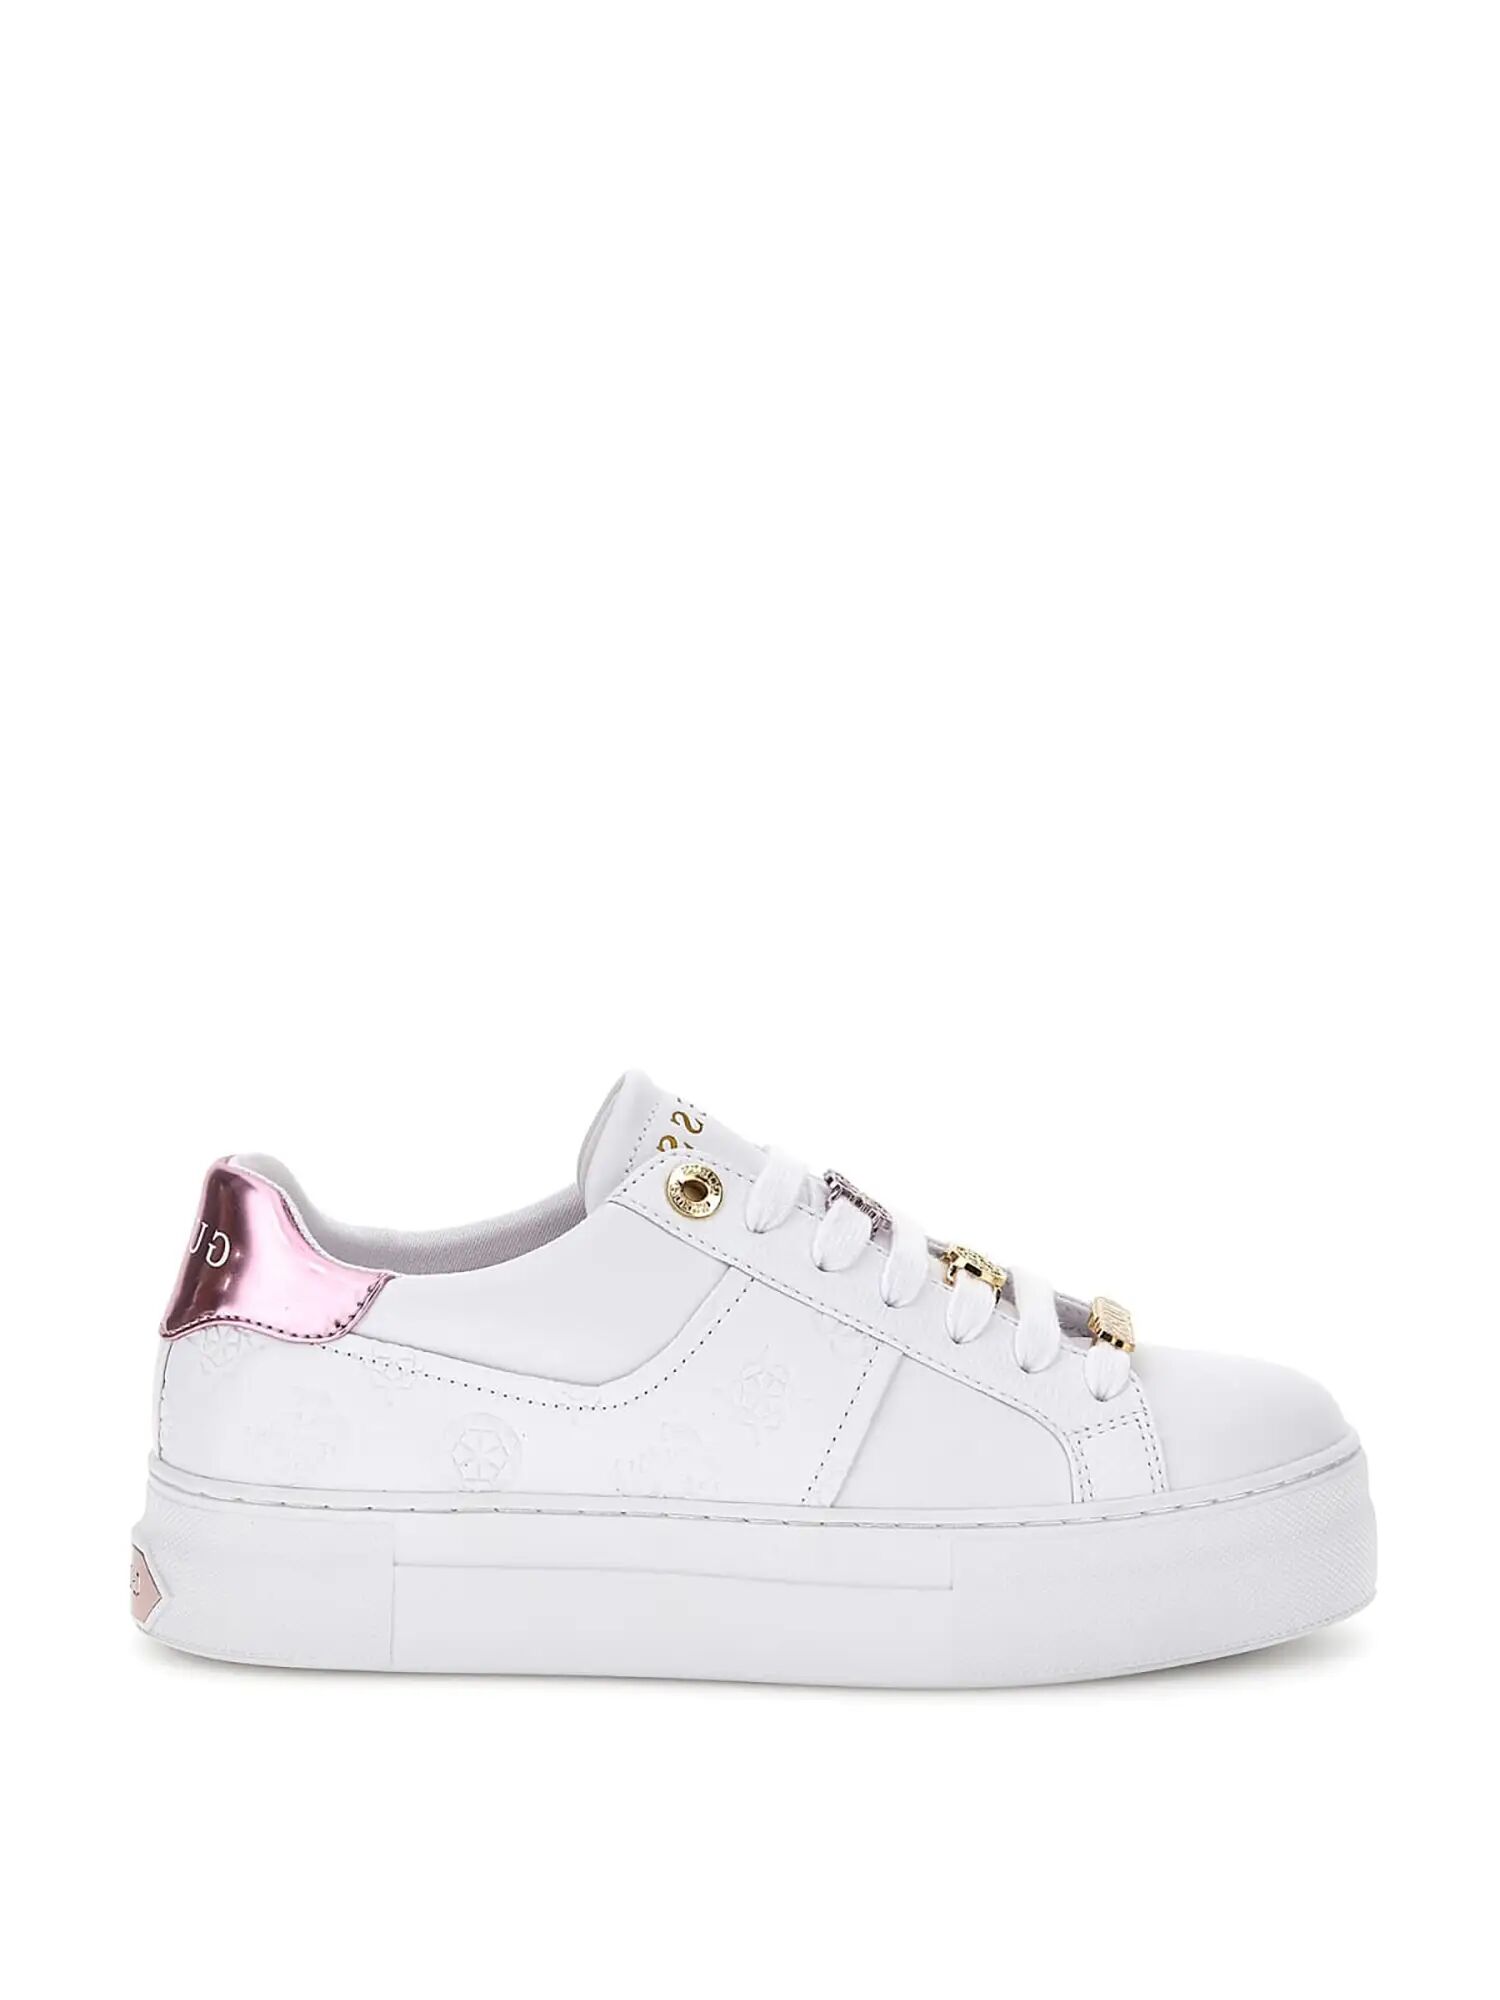 Guess Sneakers Bianche Donna BIANCO/ROSA 40